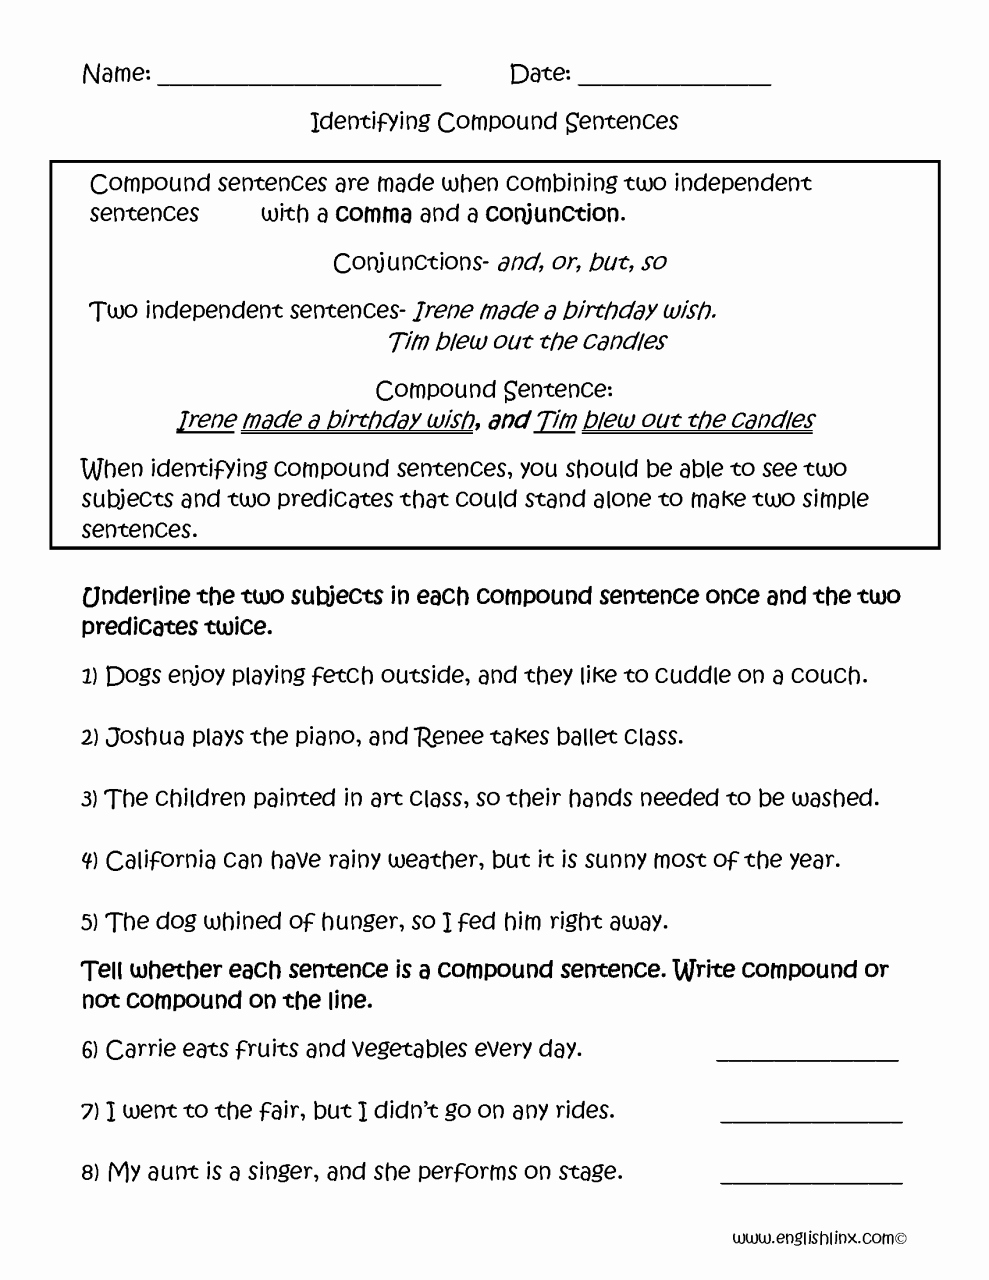 Complex Sentences Worksheets with Answers New Pound Sentences Worksheet with Answers for Class 7